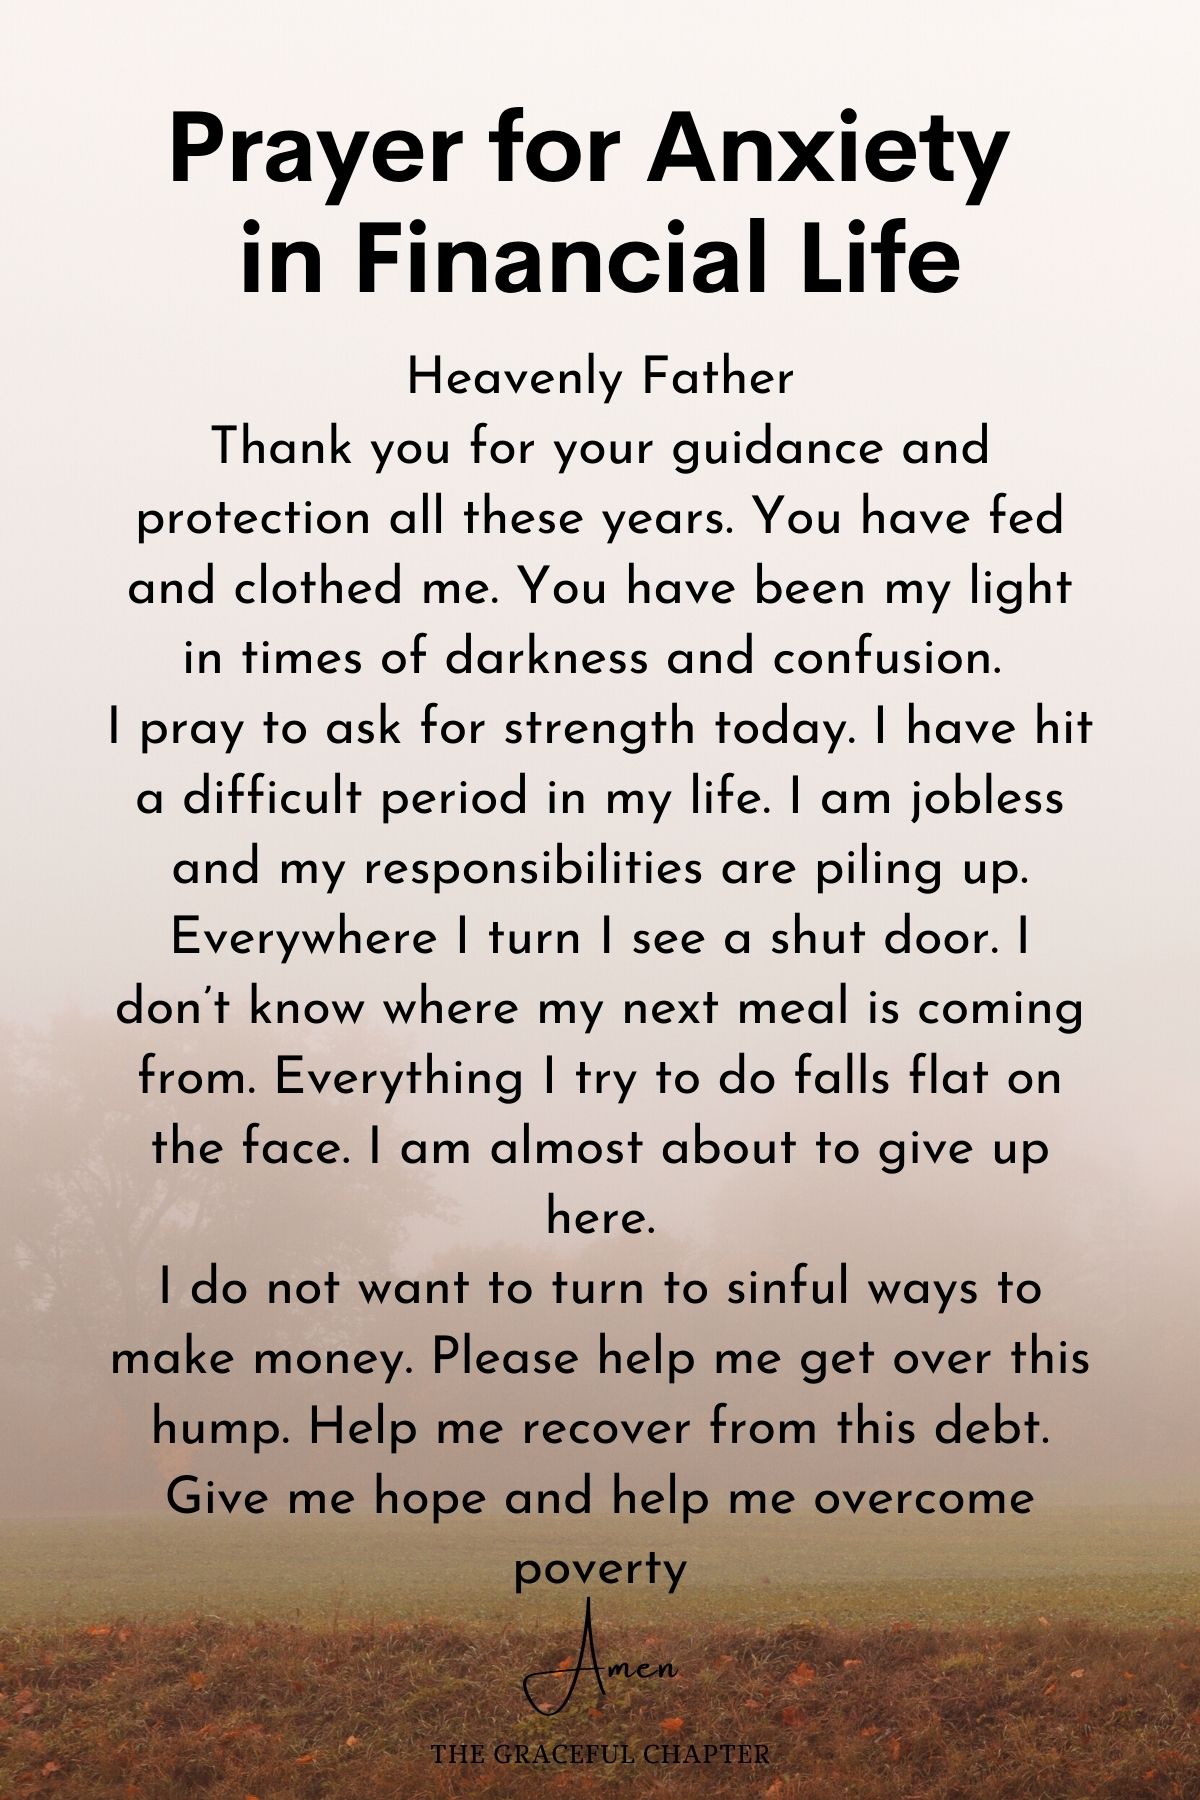 Prayer for Anxiety in Financial Life